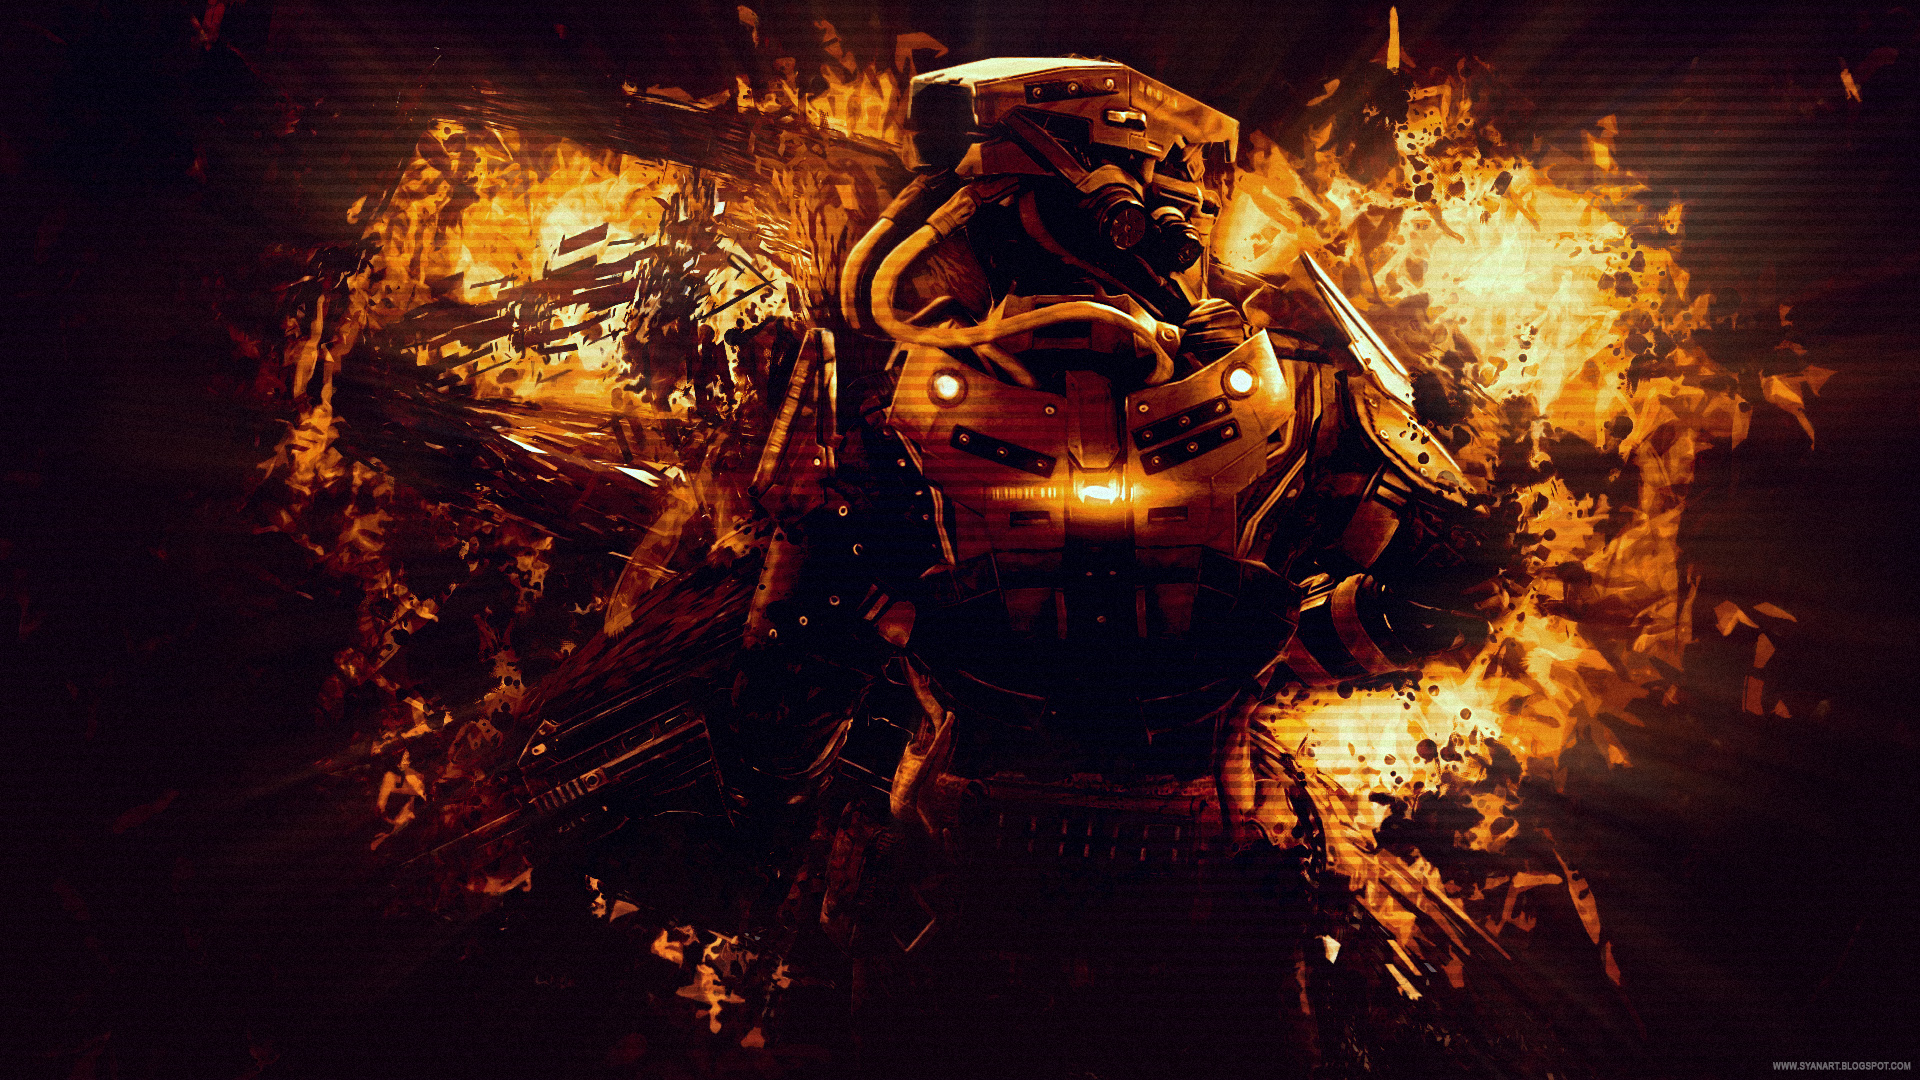 Killzone Shadow Fall Wallpaper Pictures In High Definition